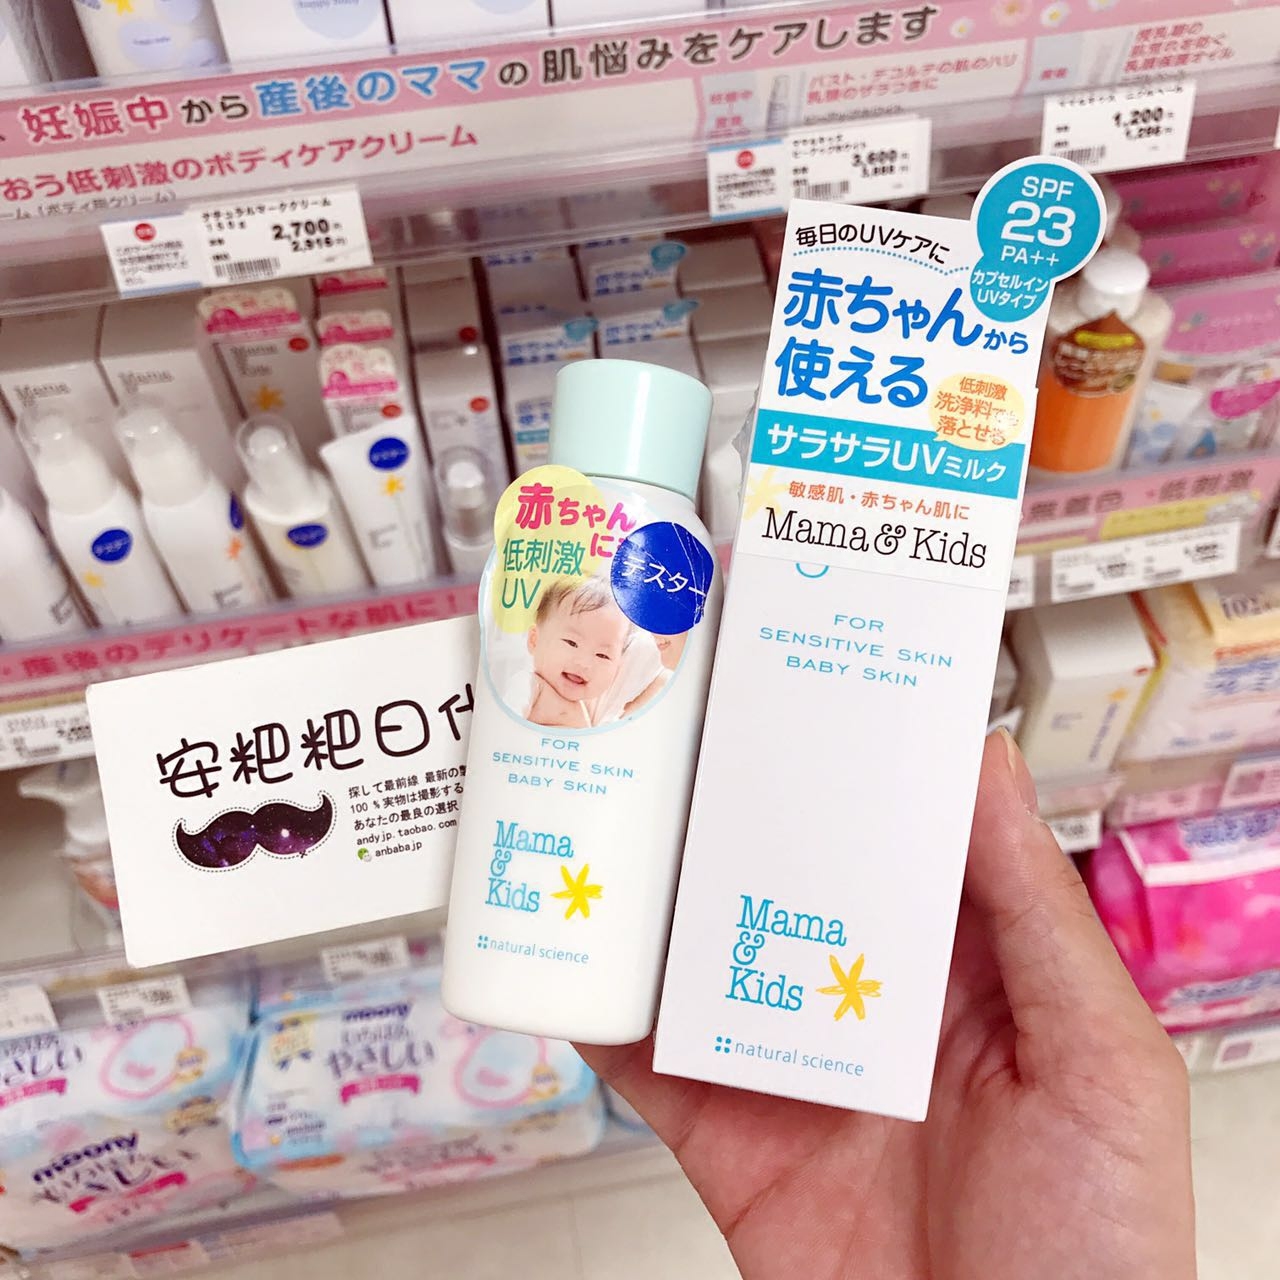  Japan native MamaKids Pregnant women and infants Sunscreen Cream SPF23 90ml No added